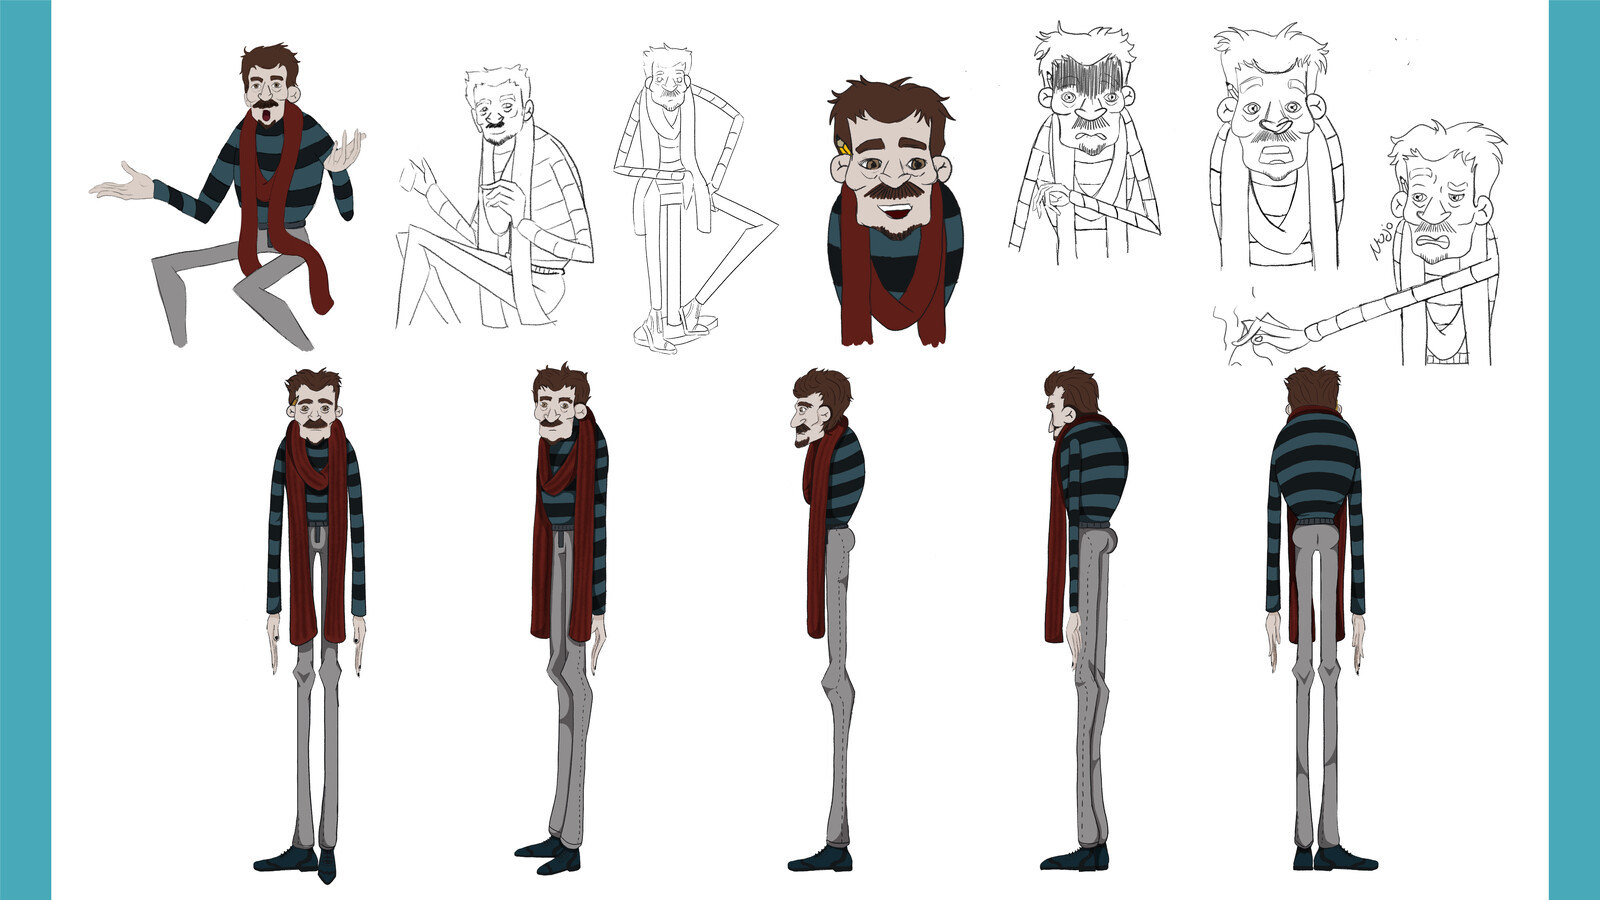 Here we can see the development process of the main character, the artist, a part of pre-production carried out for the discipline of Character Development, which explores poses and expressions.